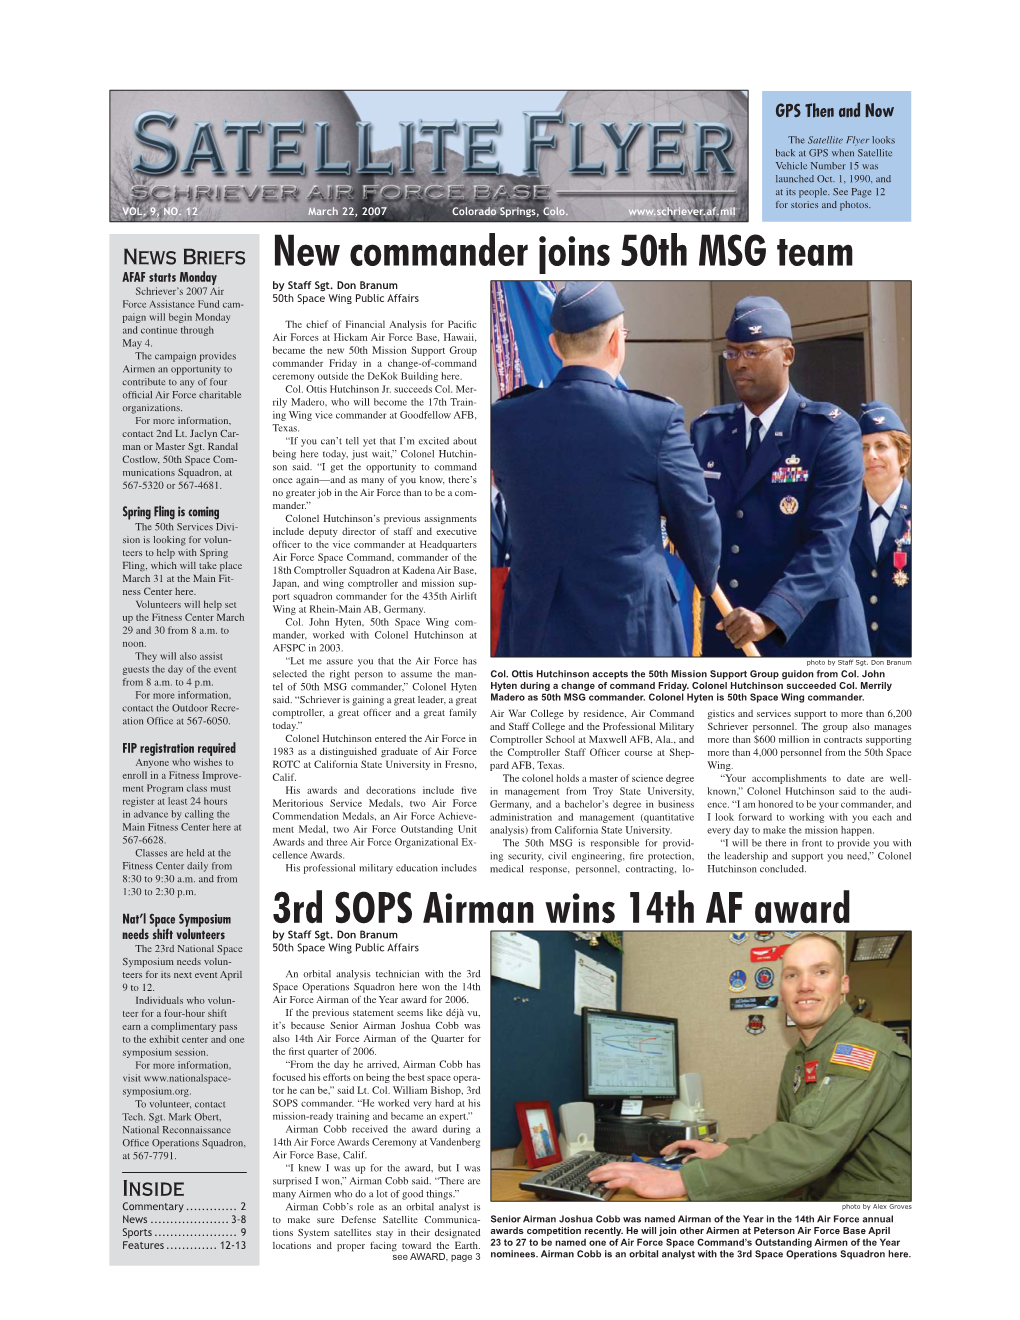 New Commander Joins 50Th MSG Team 3Rd SOPS Airman Wins 14Th AF